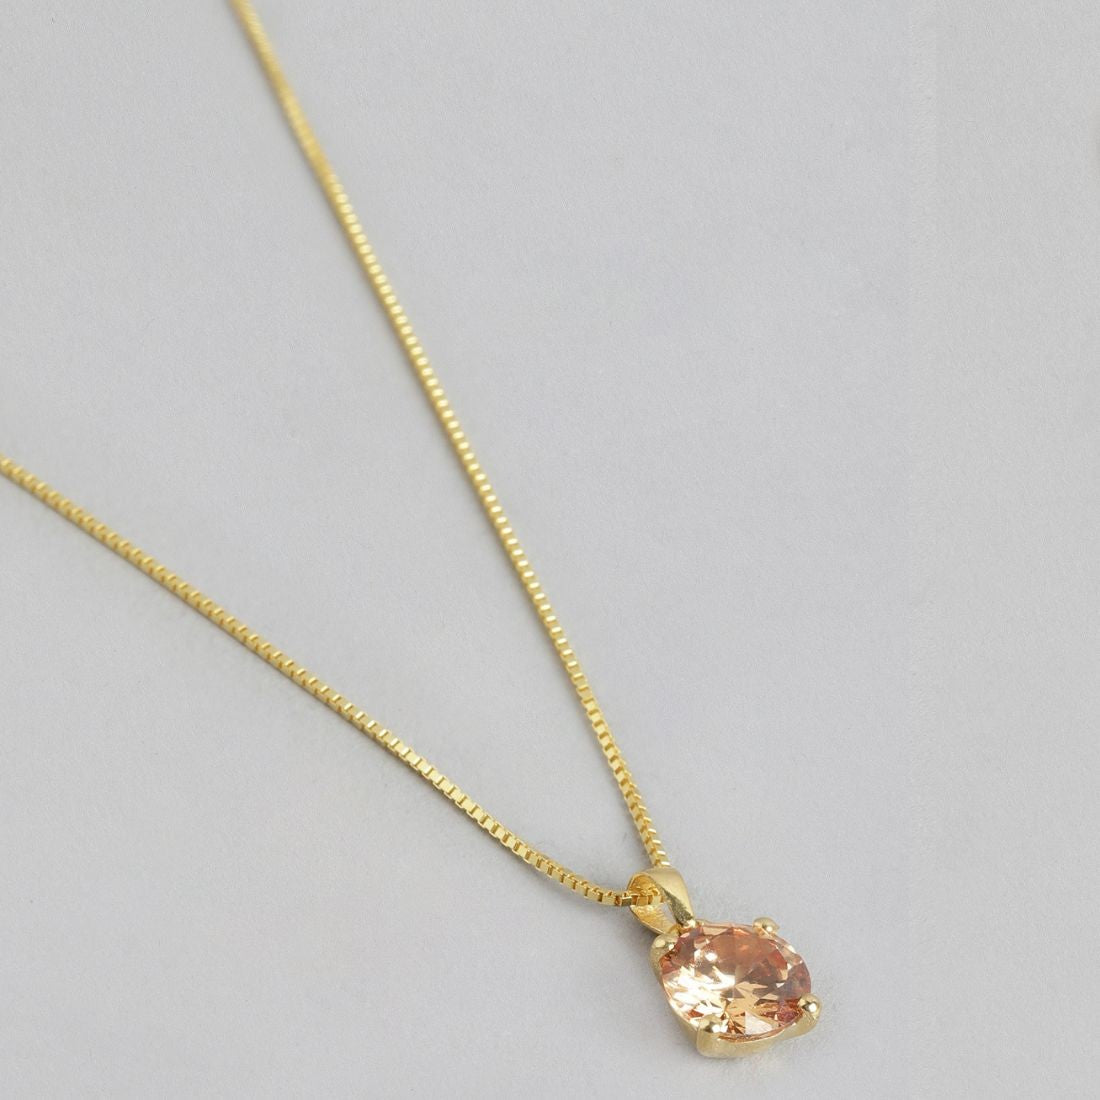 Yellow Solitaire Box Chain Gold Plated 925 Sterling Silver Pendant with Chain